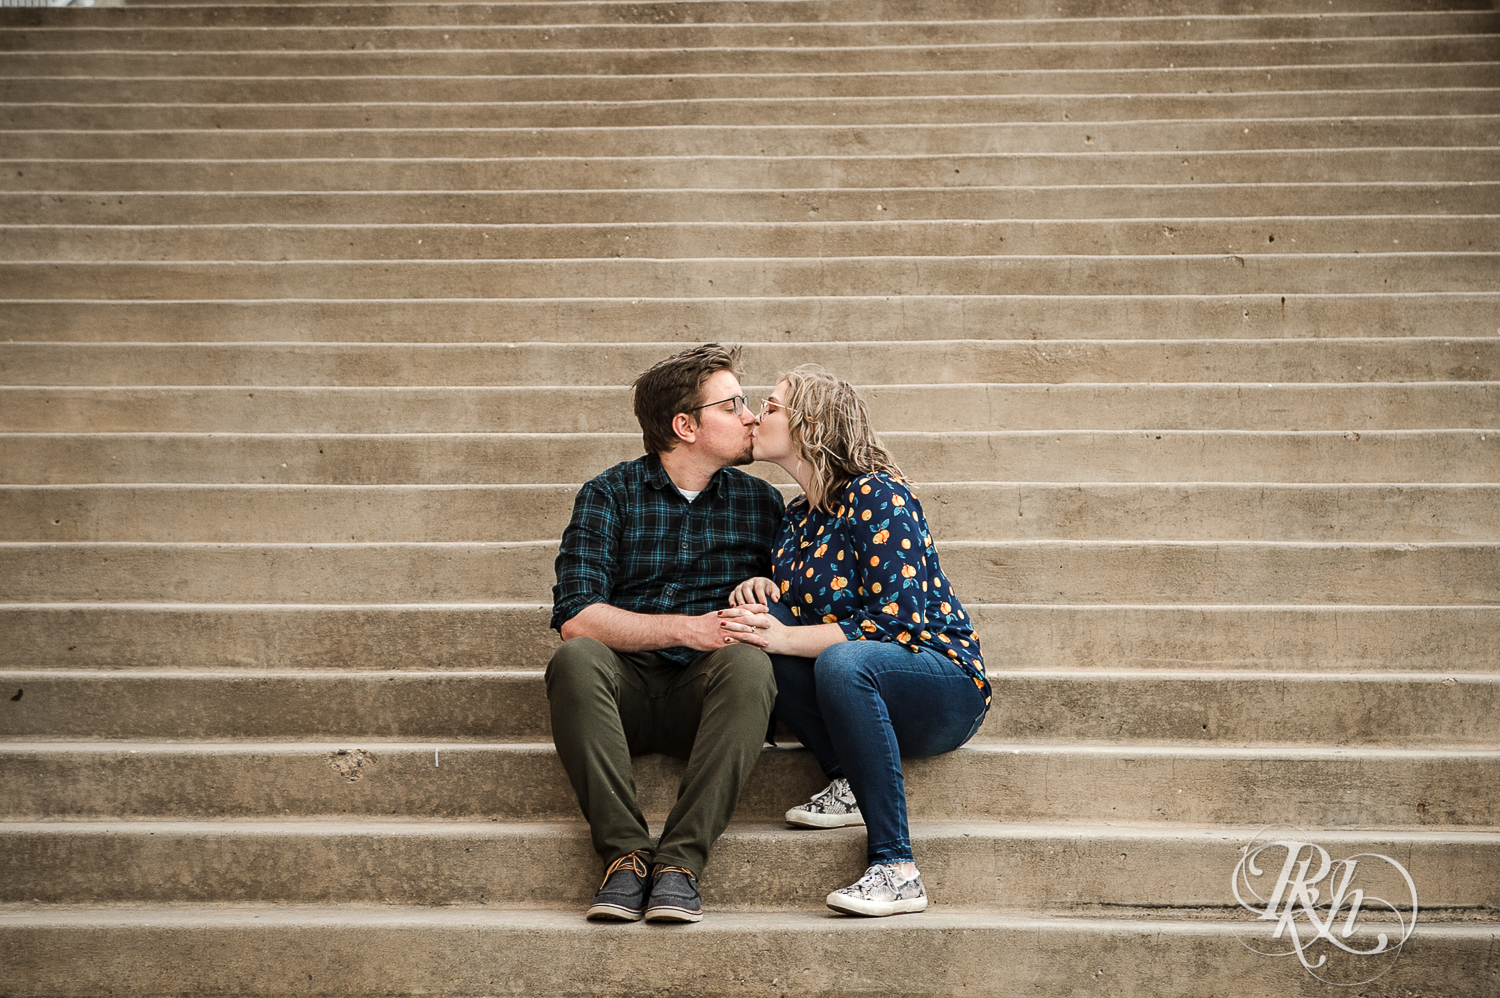 Blond woman with glasses and man with glasses kiss on steps in Saint Paul, Minnesota.